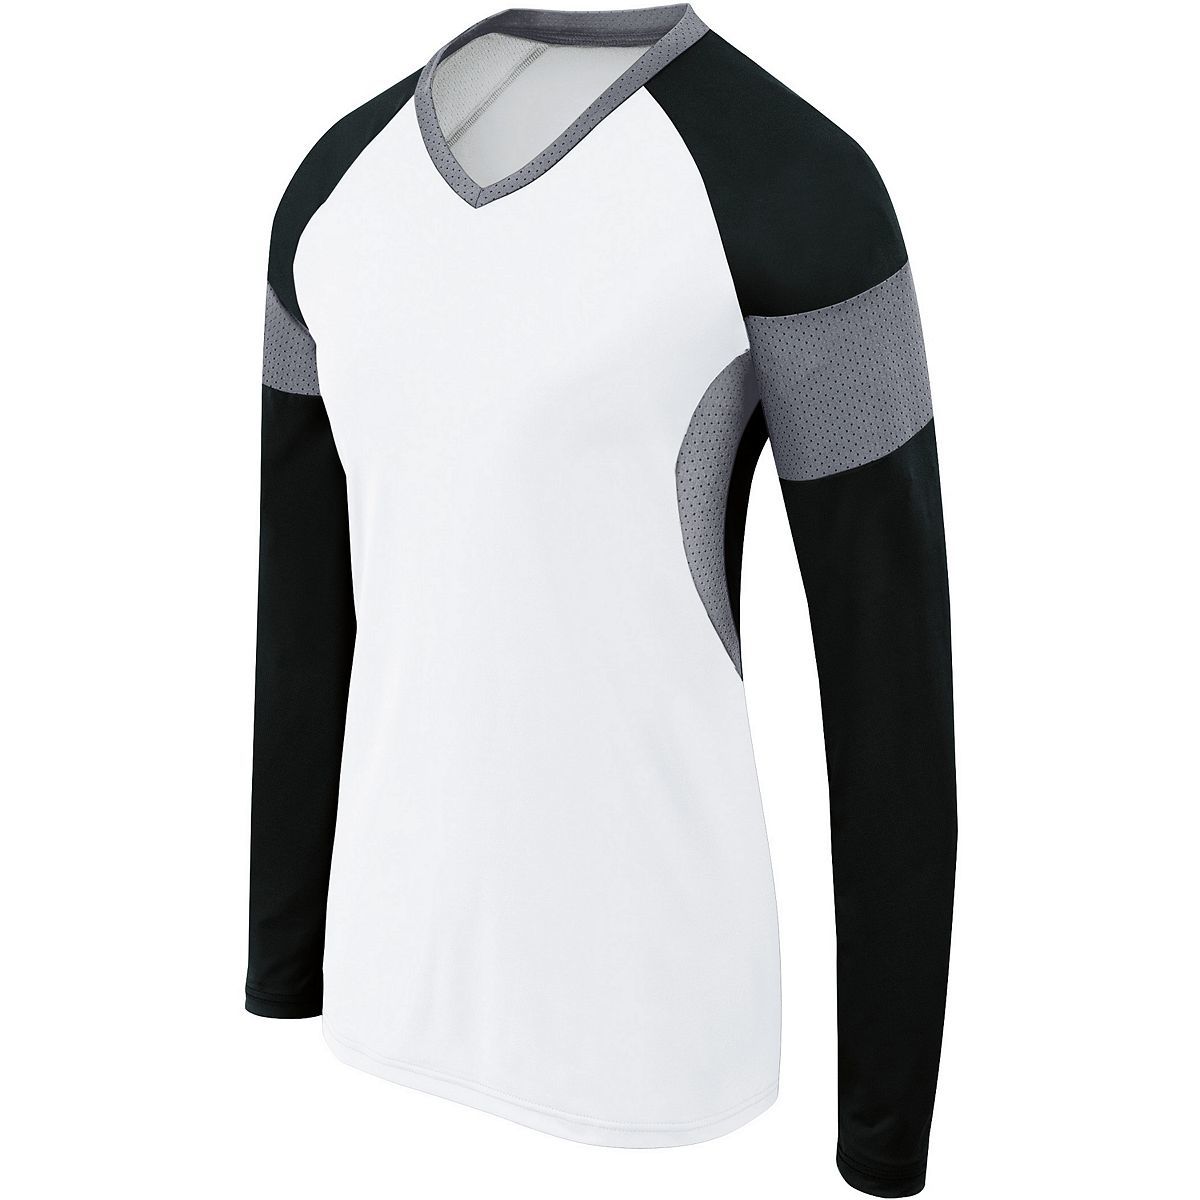 High 5 Ladies Long Sleeve Raptor Jersey in White/Black/Graphite  -Part of the Ladies, Ladies-Jersey, High5-Products, Volleyball, Shirts product lines at KanaleyCreations.com